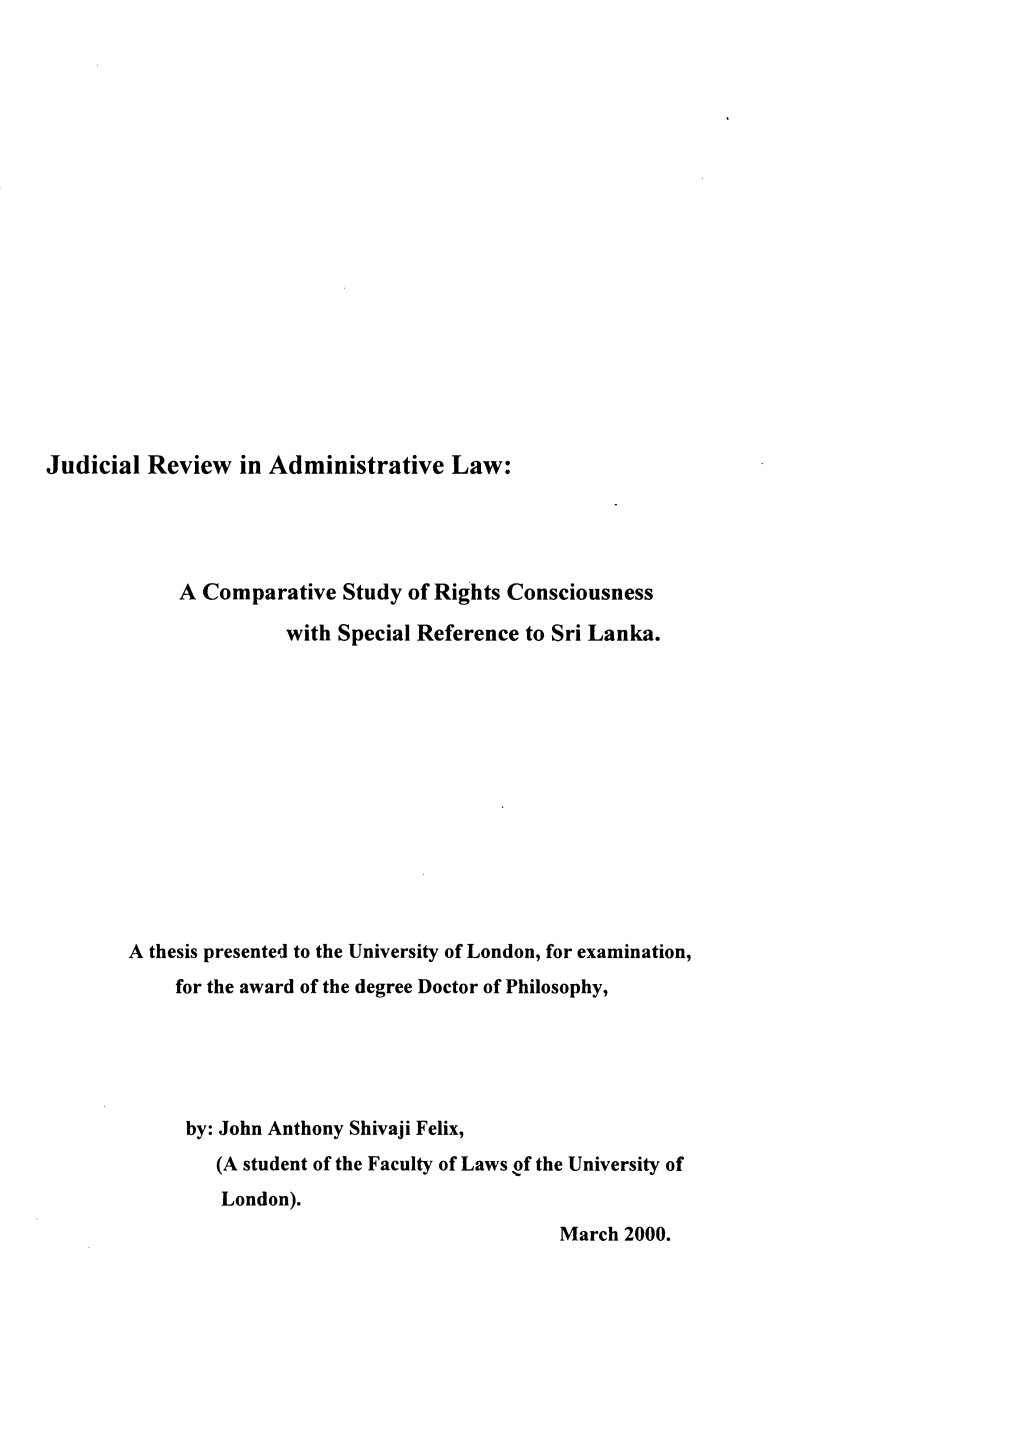 Judicial Review in Administrative Law: a Comparative Study of Rights